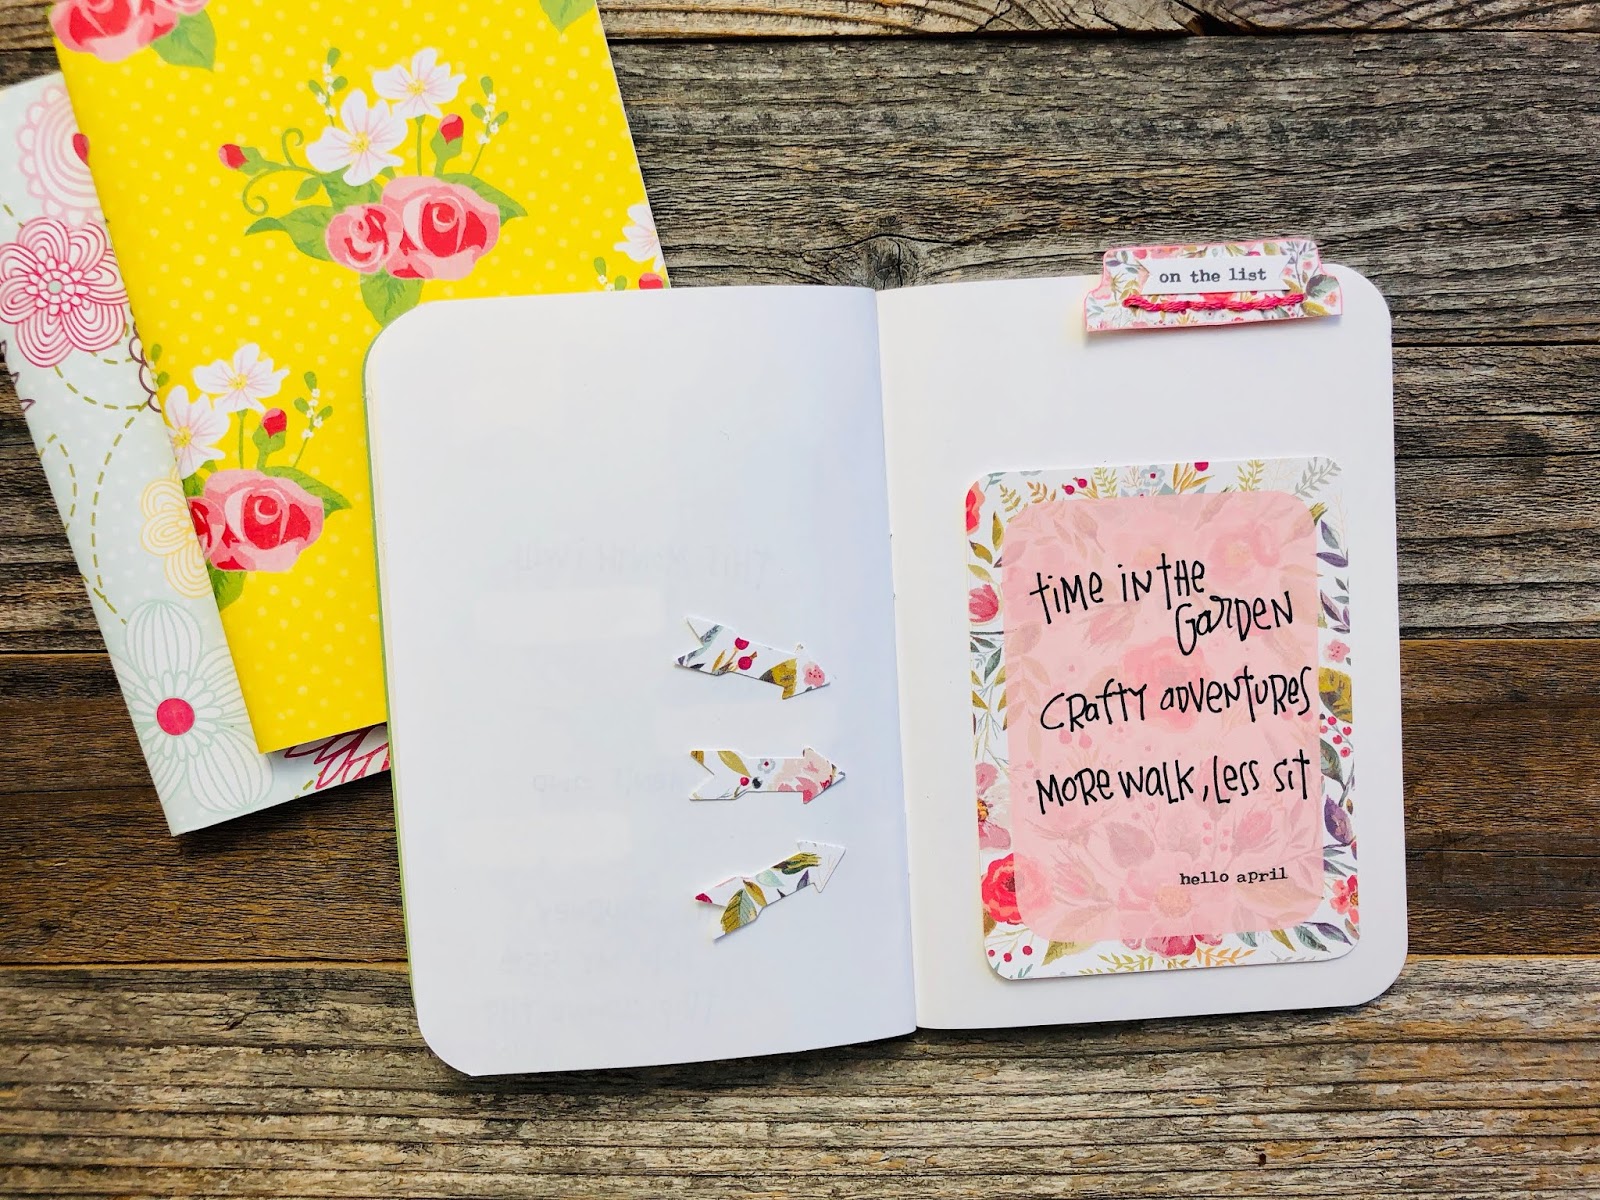 #hello april #hello #on the list #instant download #free download #journaling card #project card